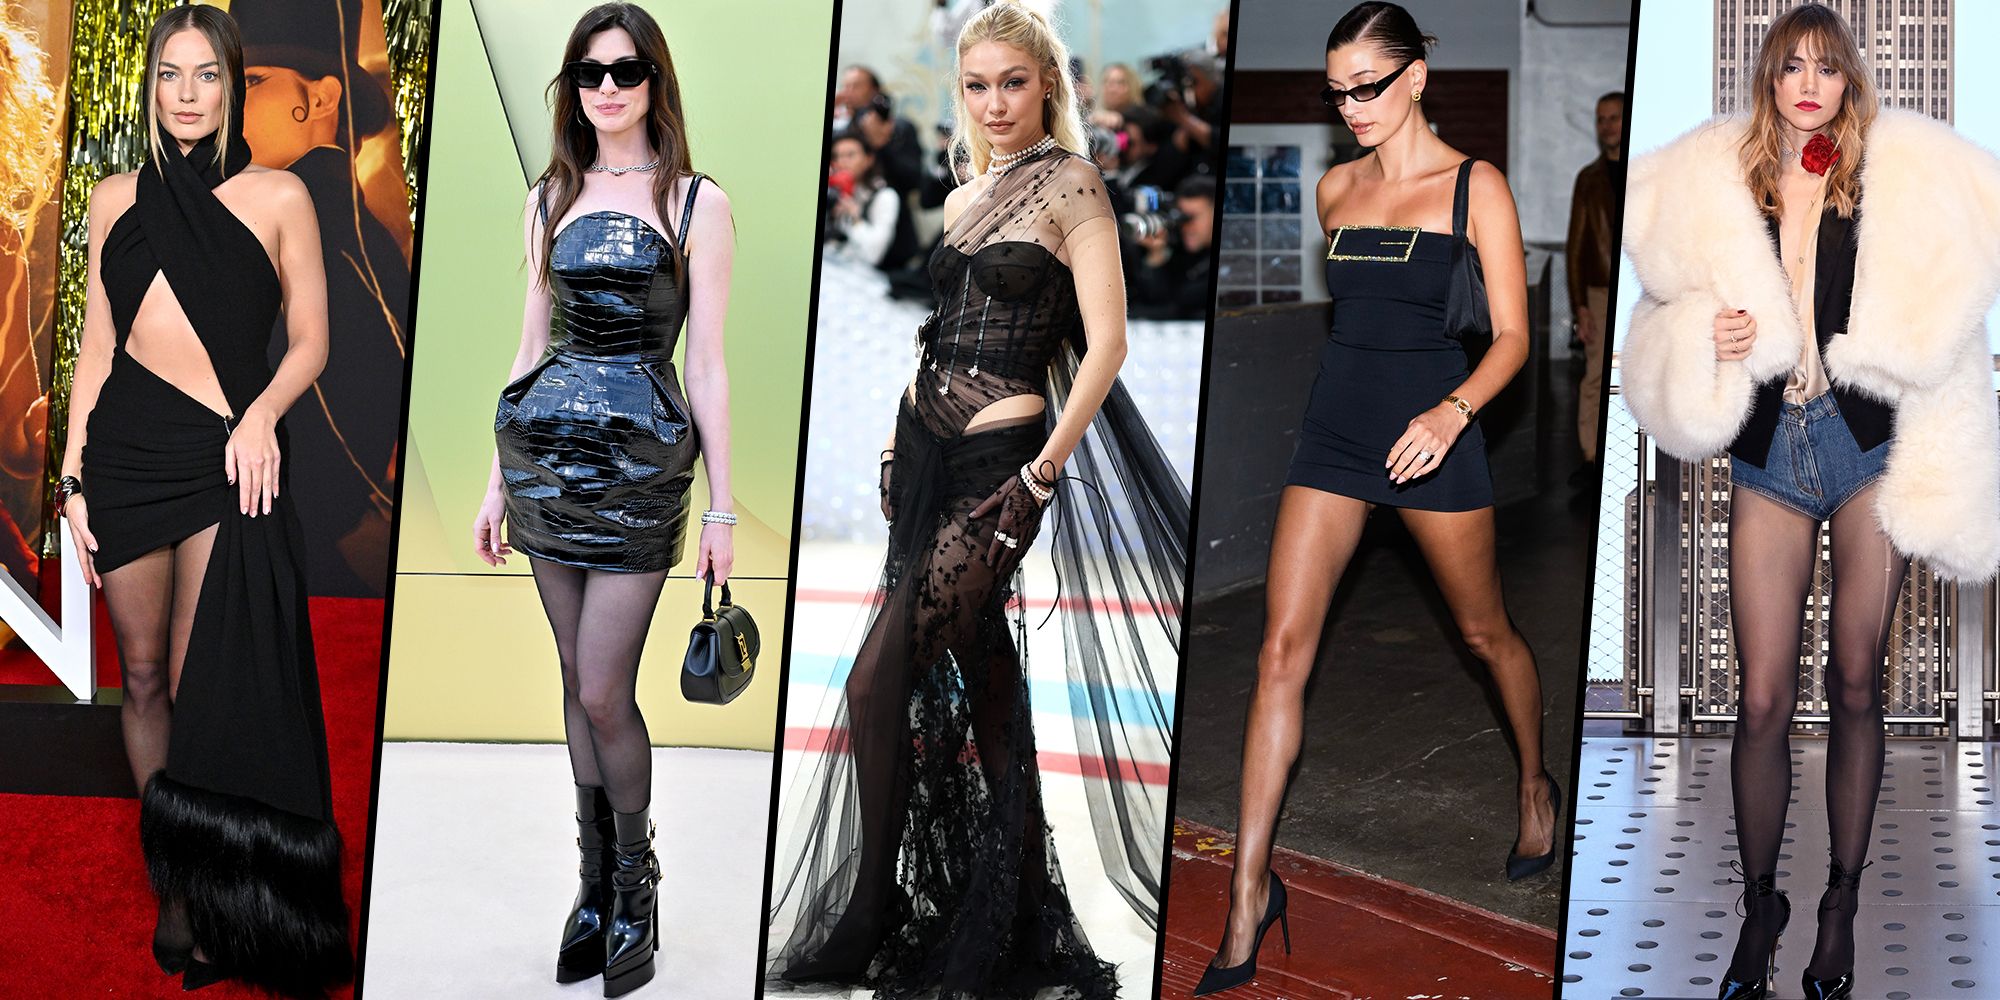 E L L E // Why Is Every Celebrity Wearing Calzedonia Tights?  @infinitycre8ive @fallynblair